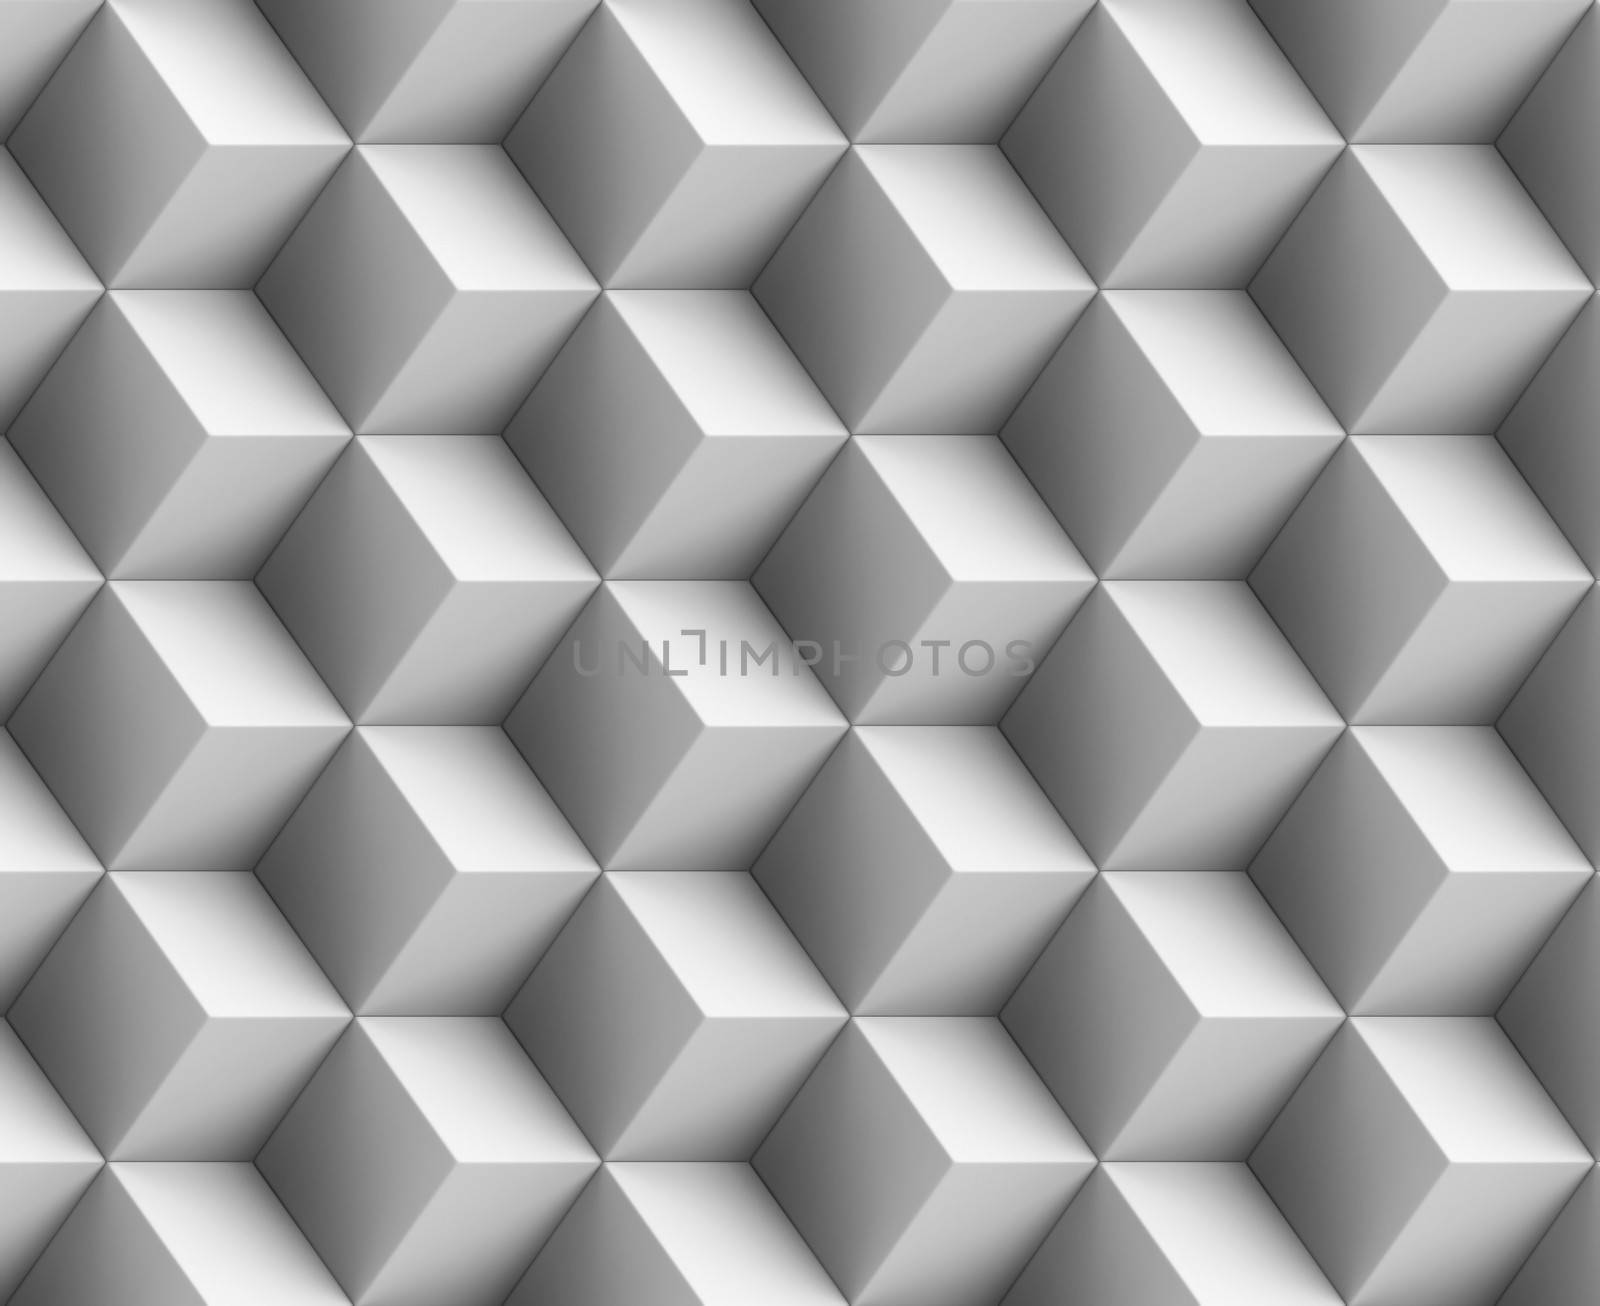 Bump map texture of metal scales, such as armor or chainmail